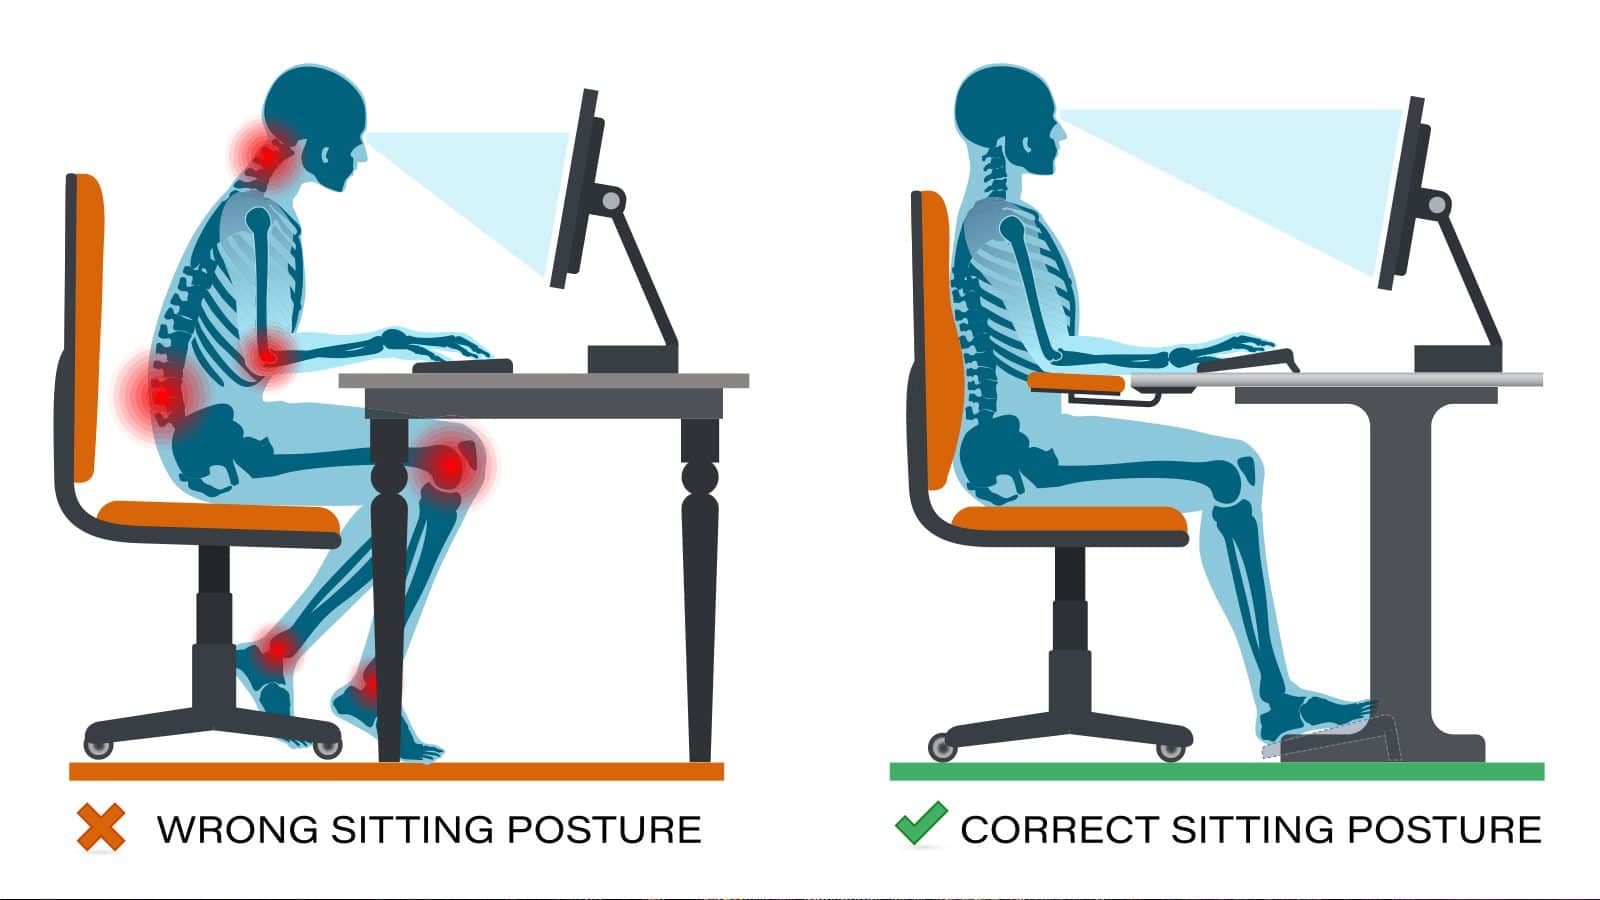 10 Ways to Improve Your Sitting Posture